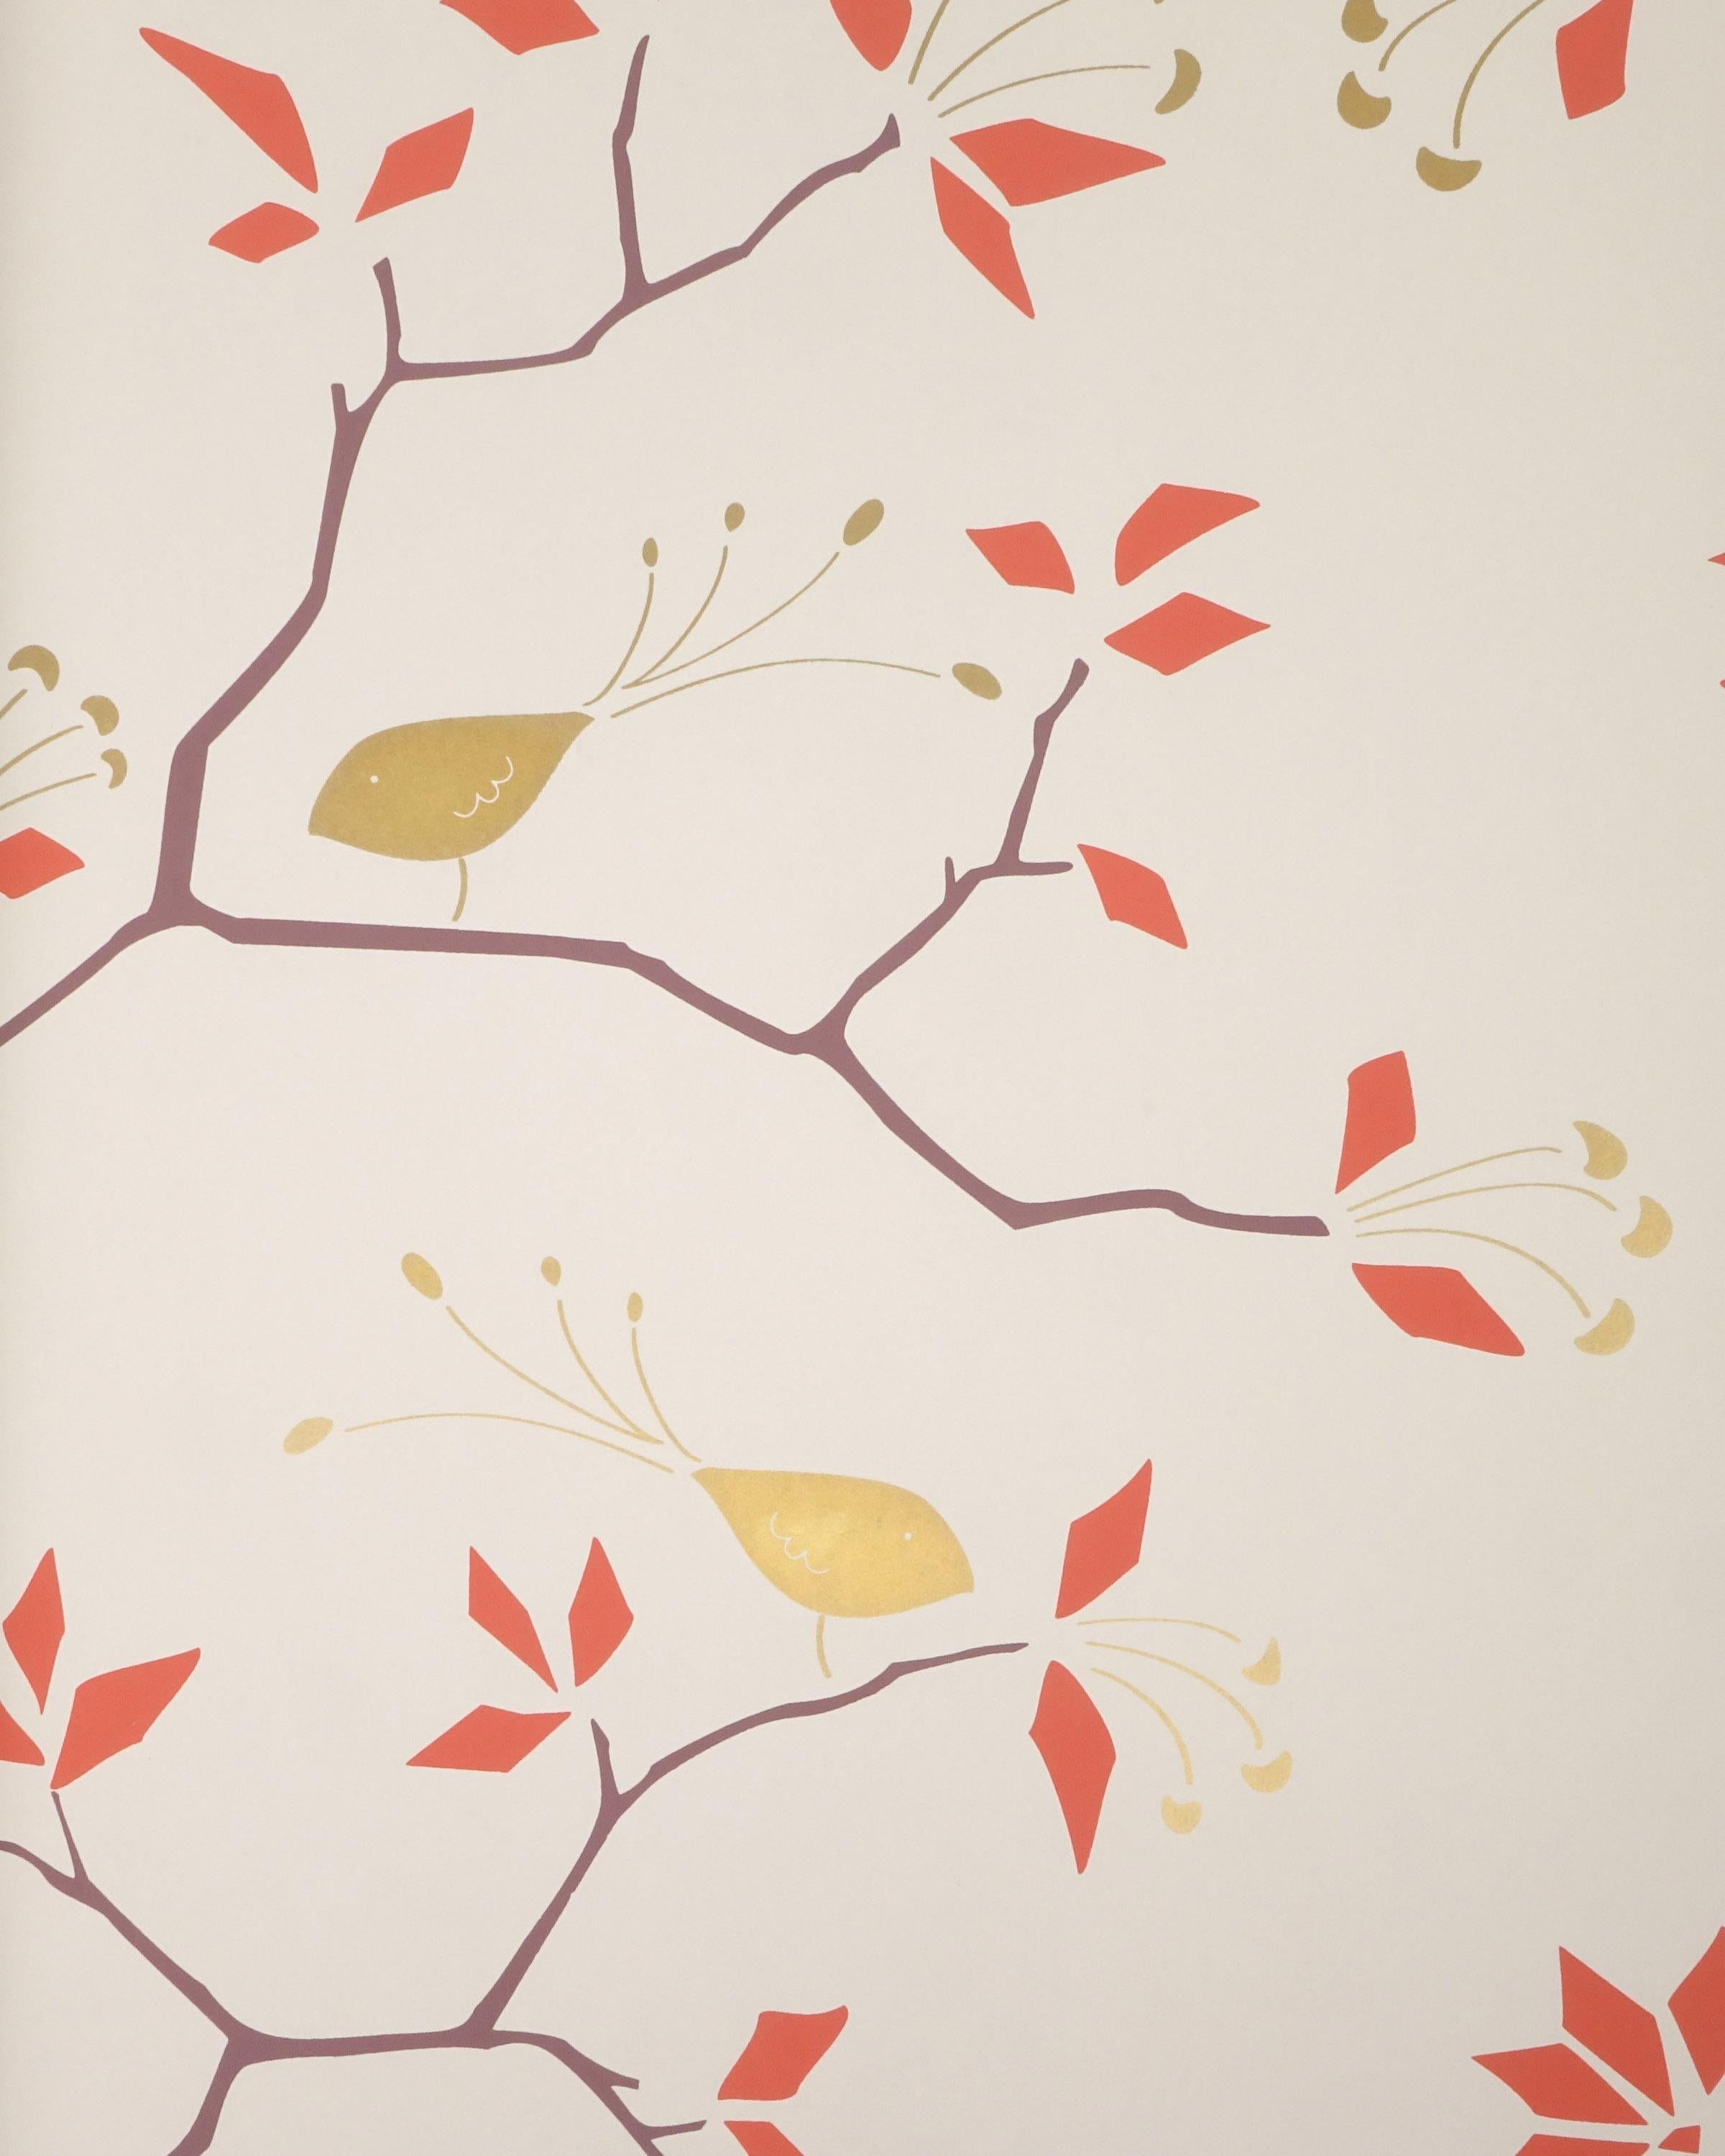 Modern Geobird Screen Printed Wallpaper in Metallic Gold/Bronze, and Tomato Red on Snow For Sale